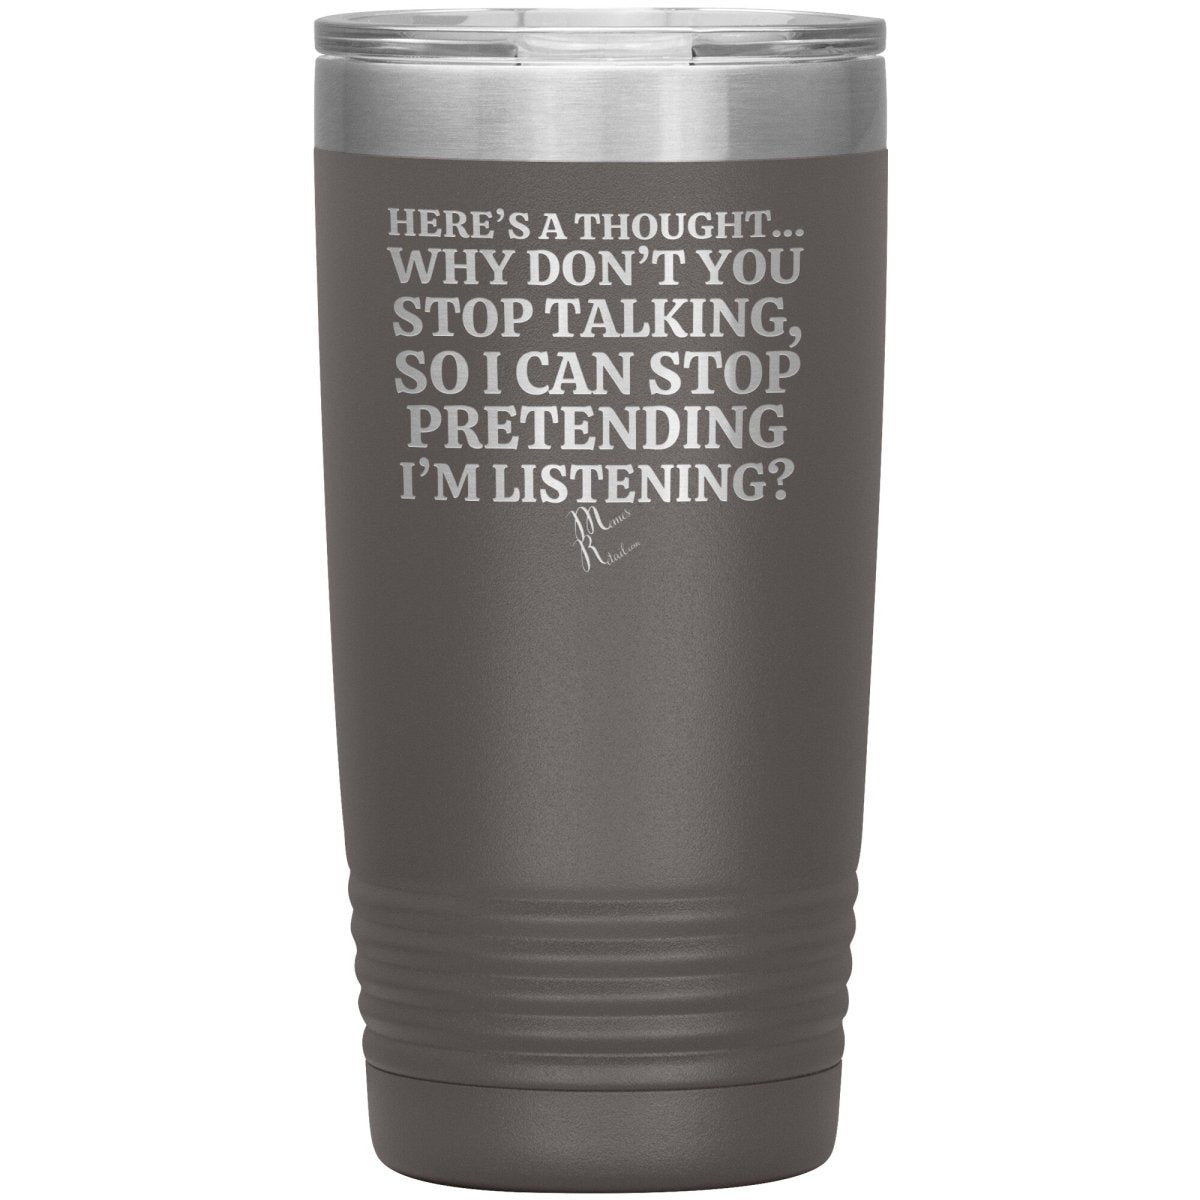 Here's A Thought...Why Don't You Stop Talking Tumblers, 20oz Insulated Tumbler / Pewter - MemesRetail.com